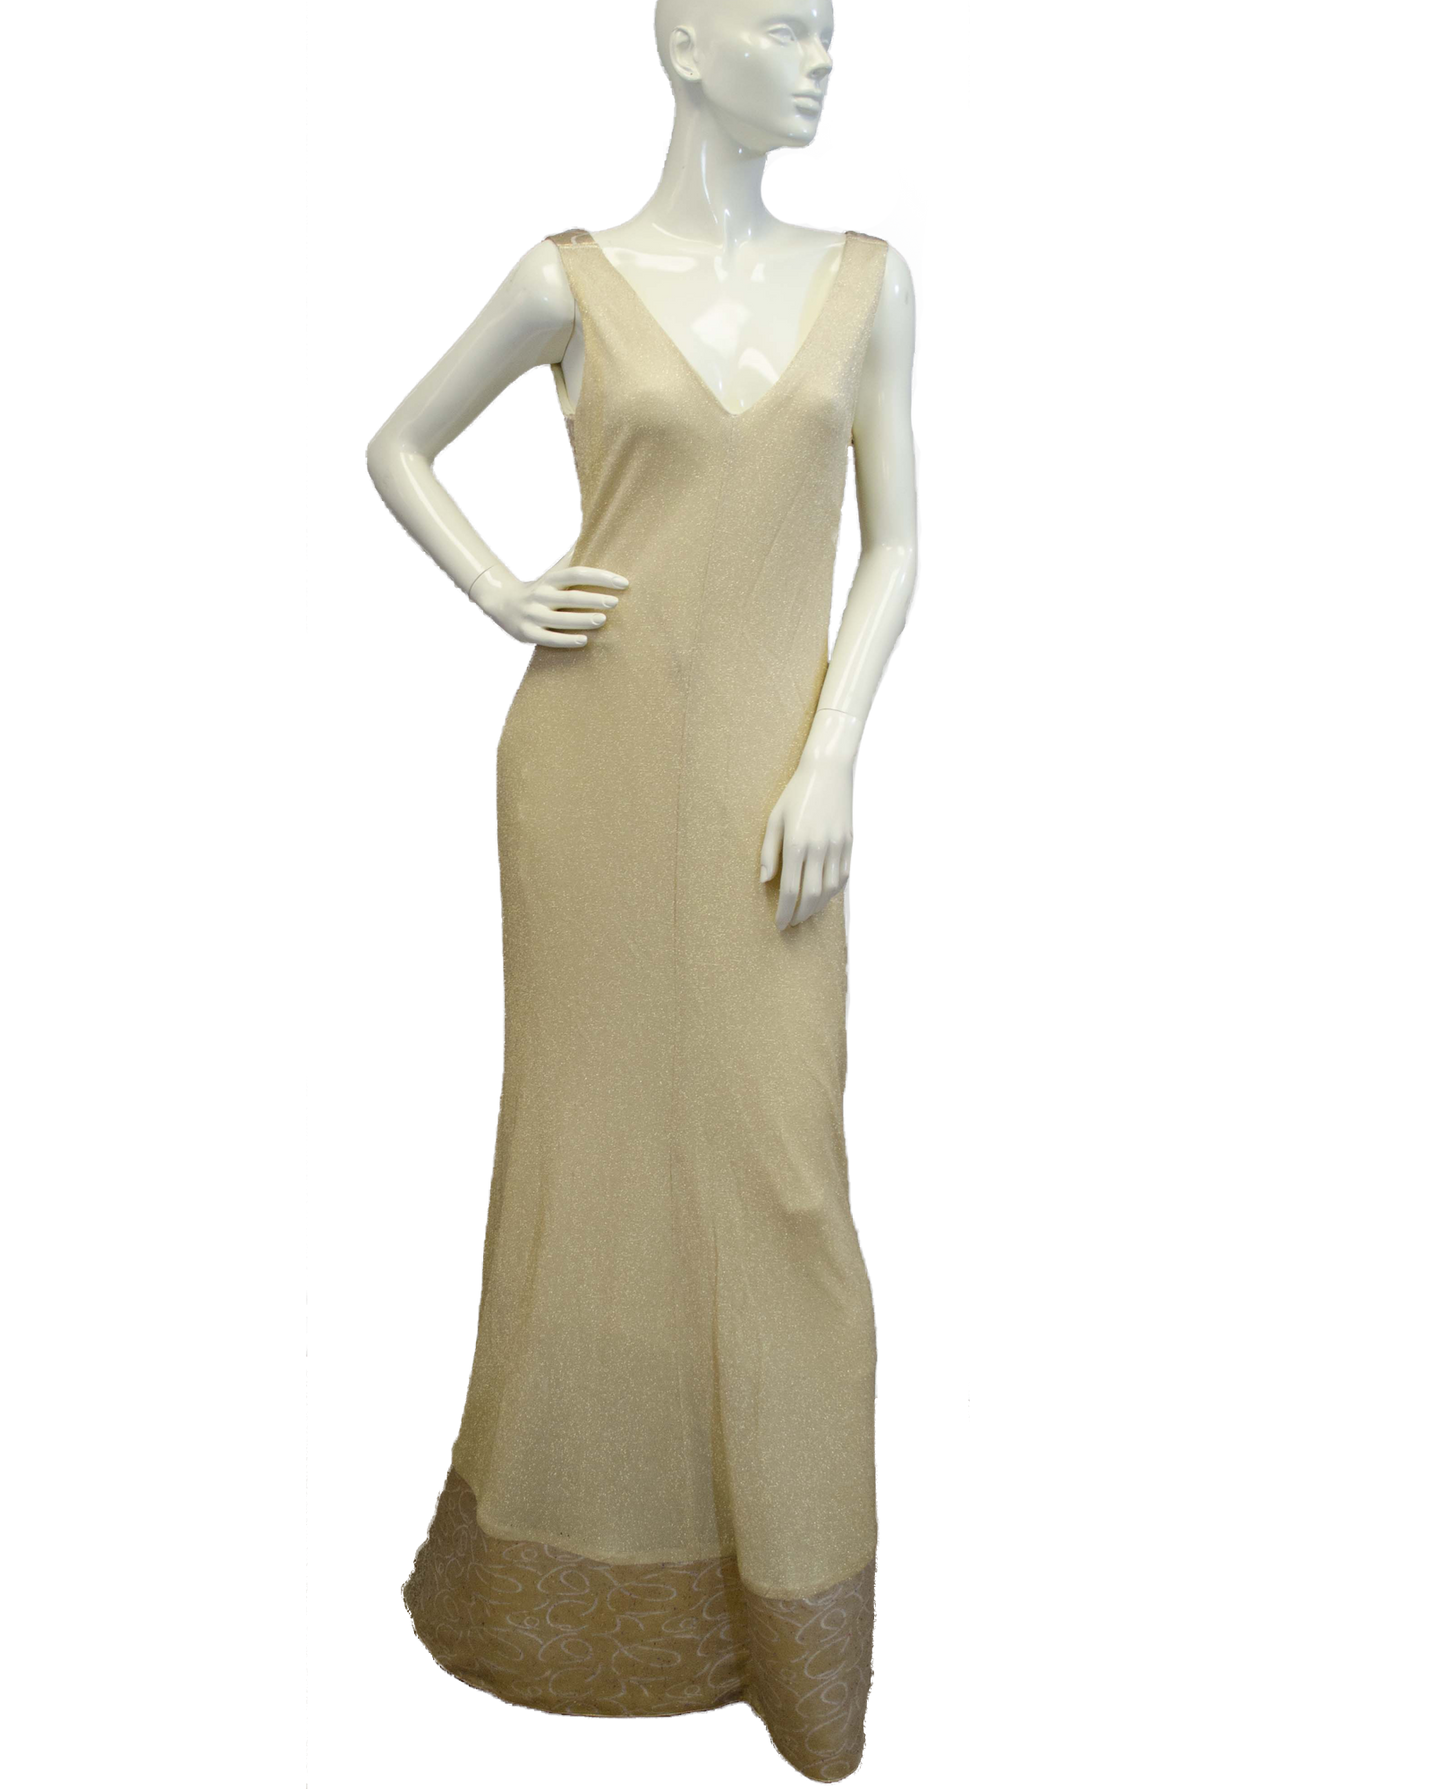 Mardi Gras Gold Dress and Cape Size Small (SKU 000077) - Designers On A Dime - 1